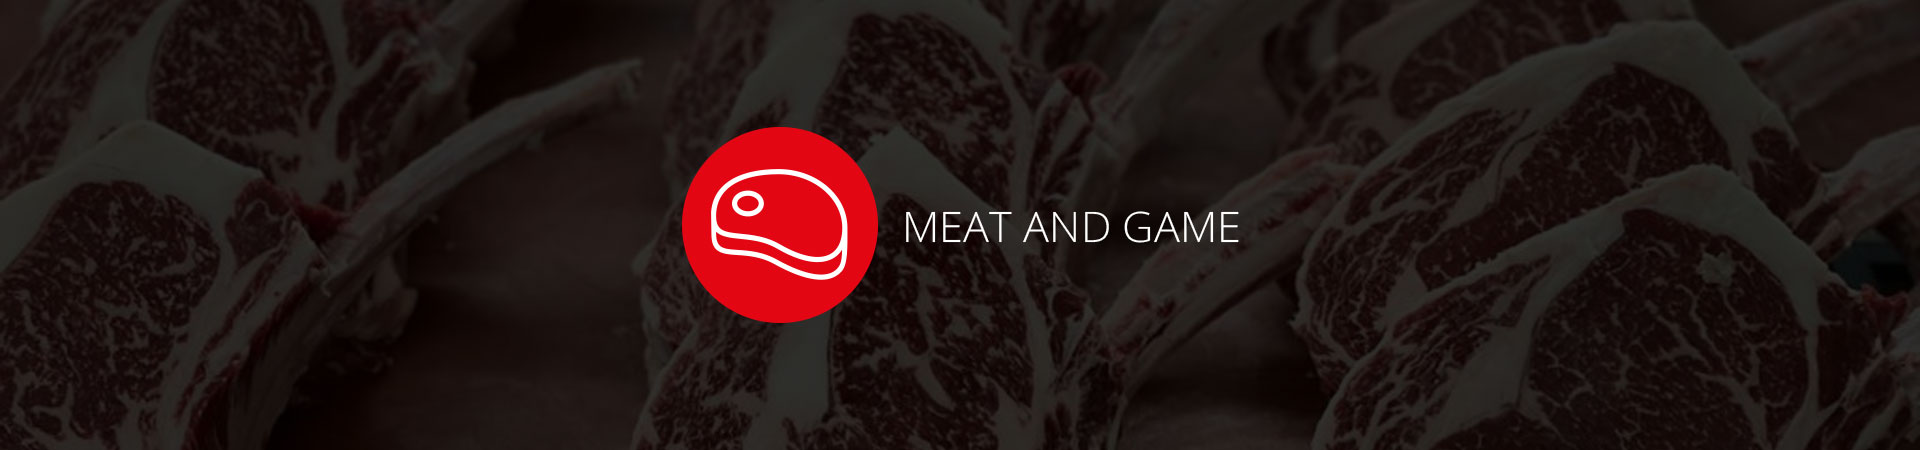 Meat and Game by SNAP Provisions